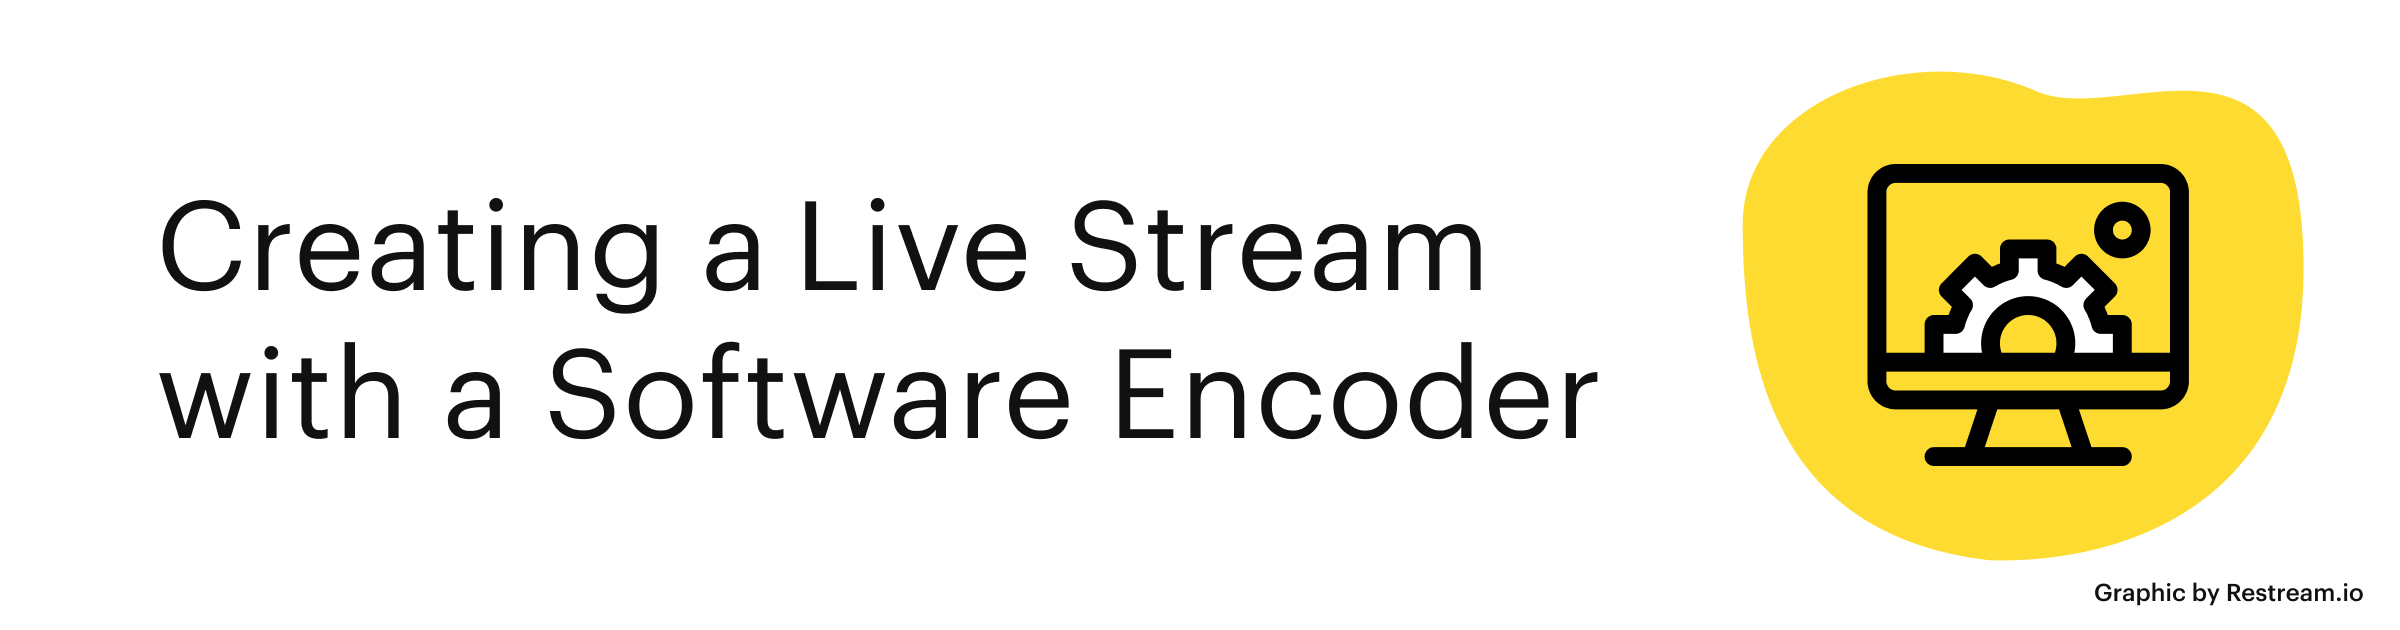 Creating a Live Stream with a Software Encoder